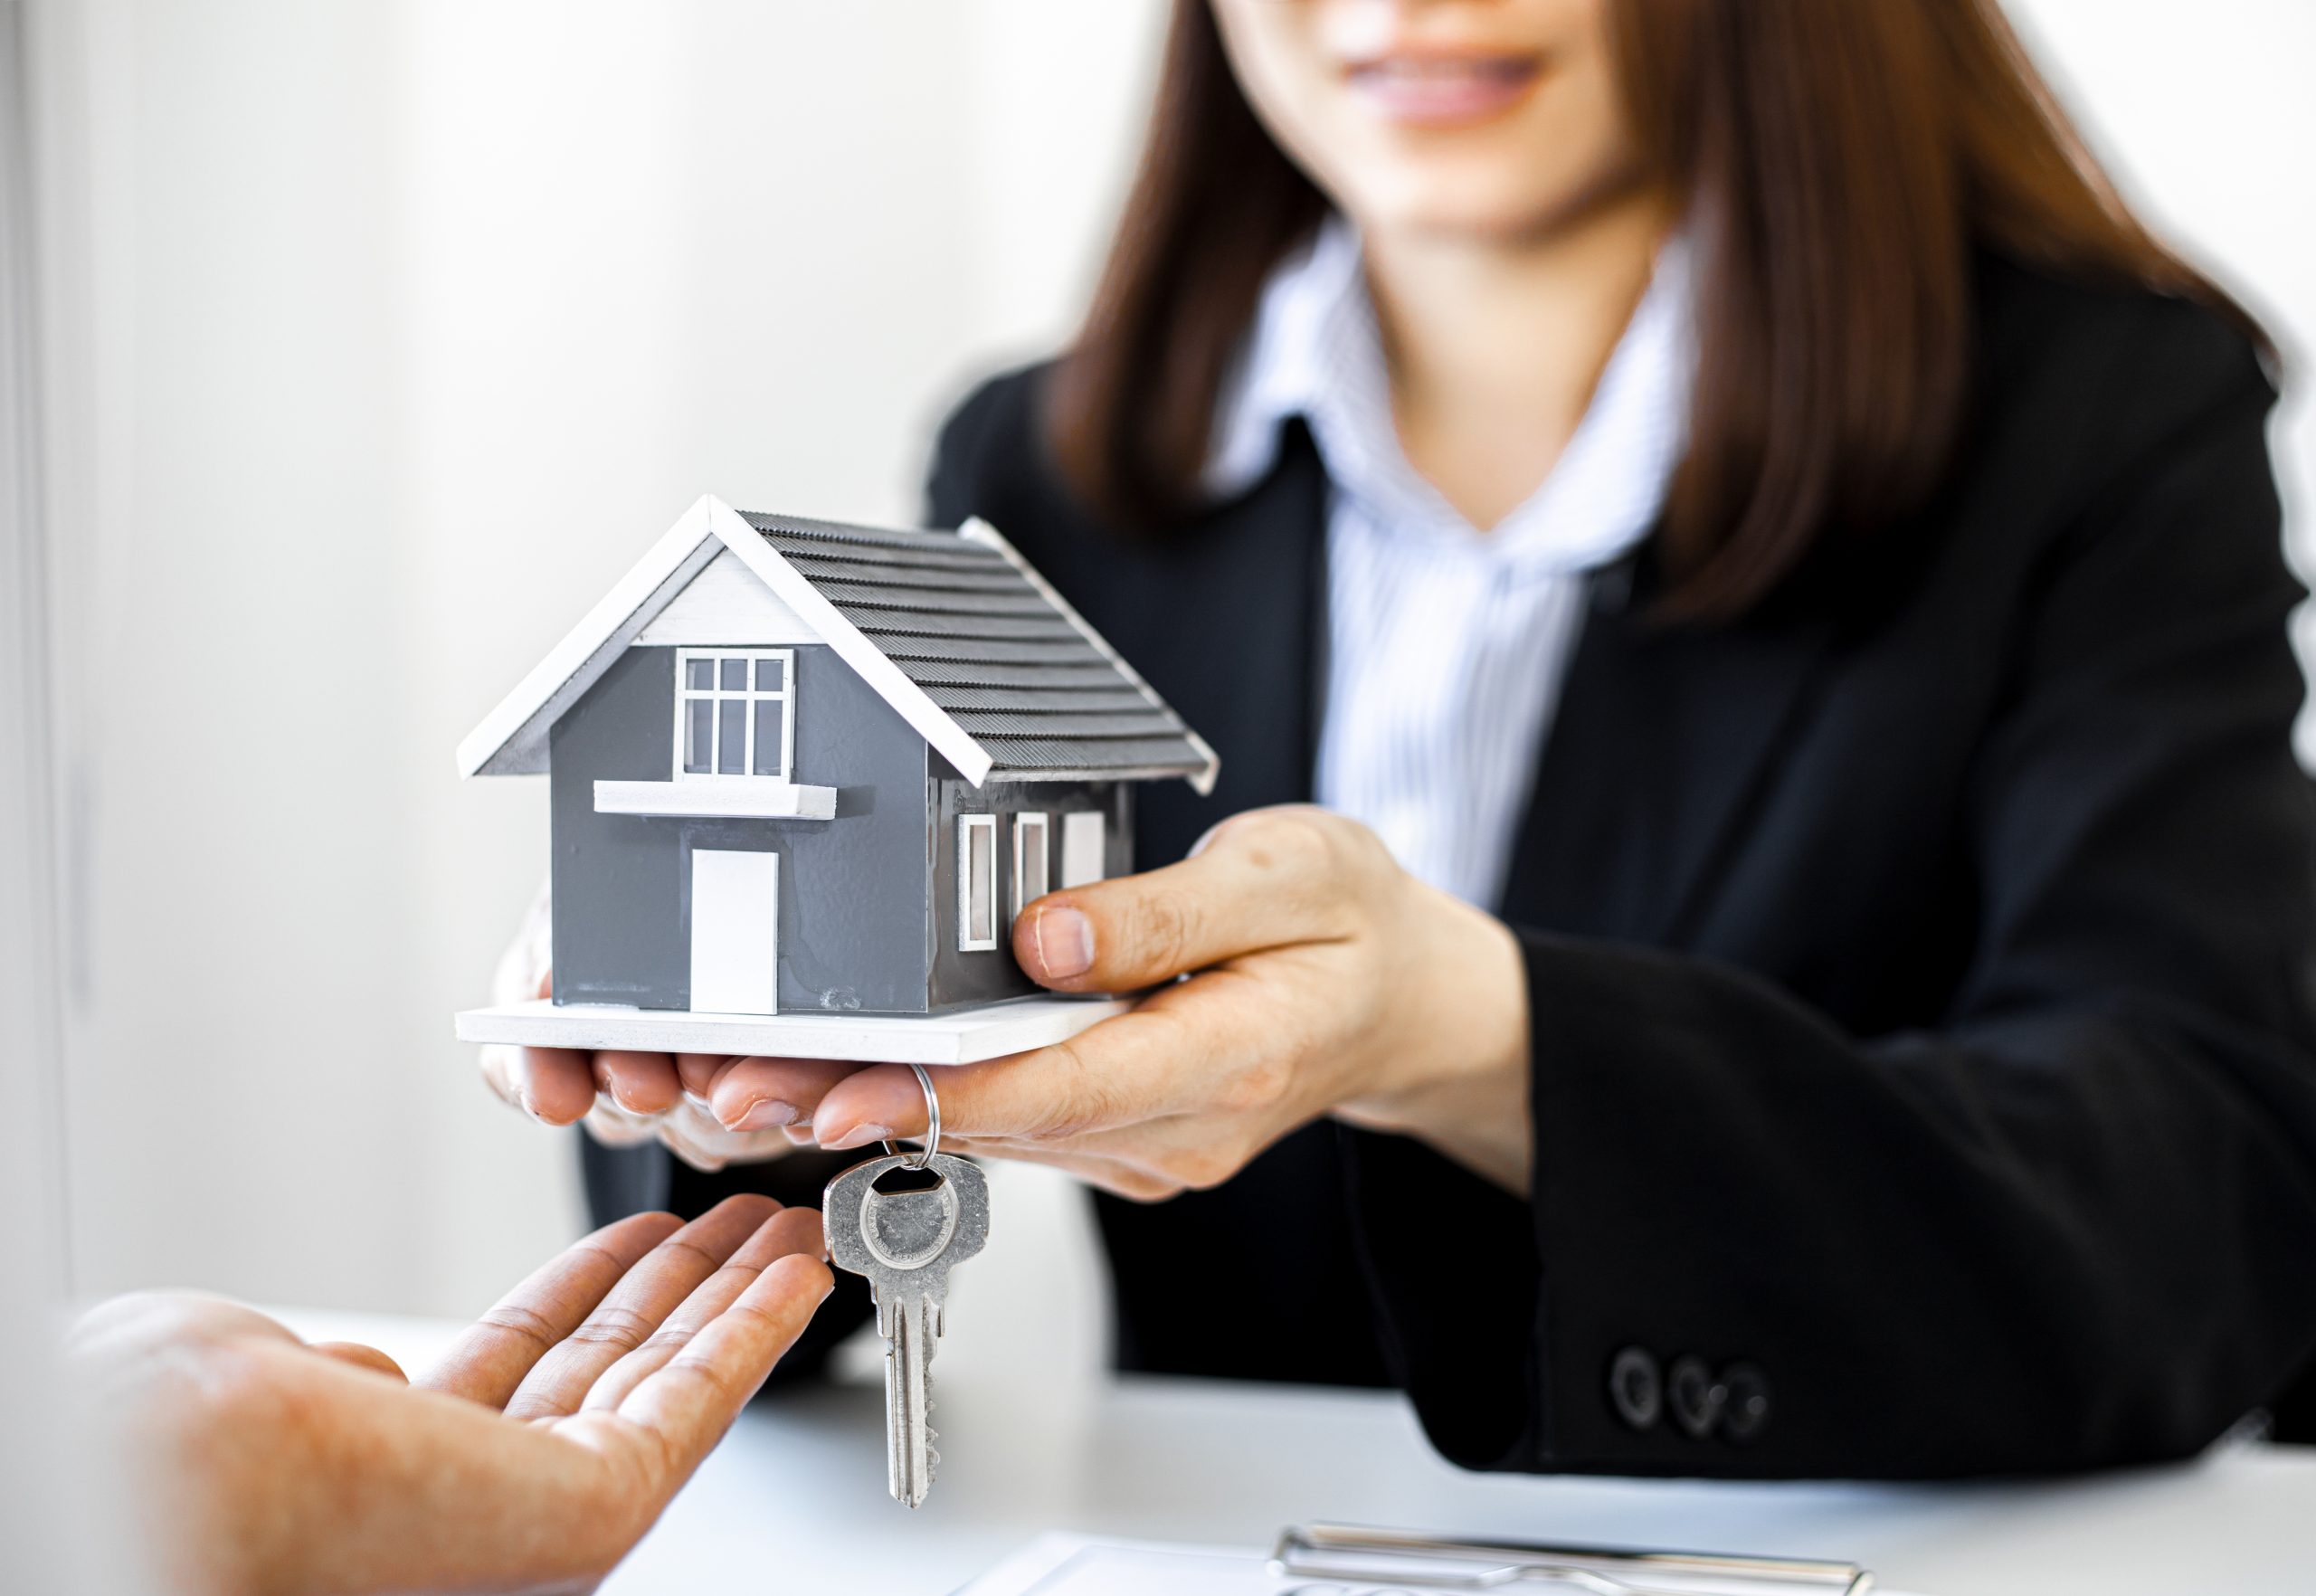 7 Reasons Why Women should Invest in Real Estate